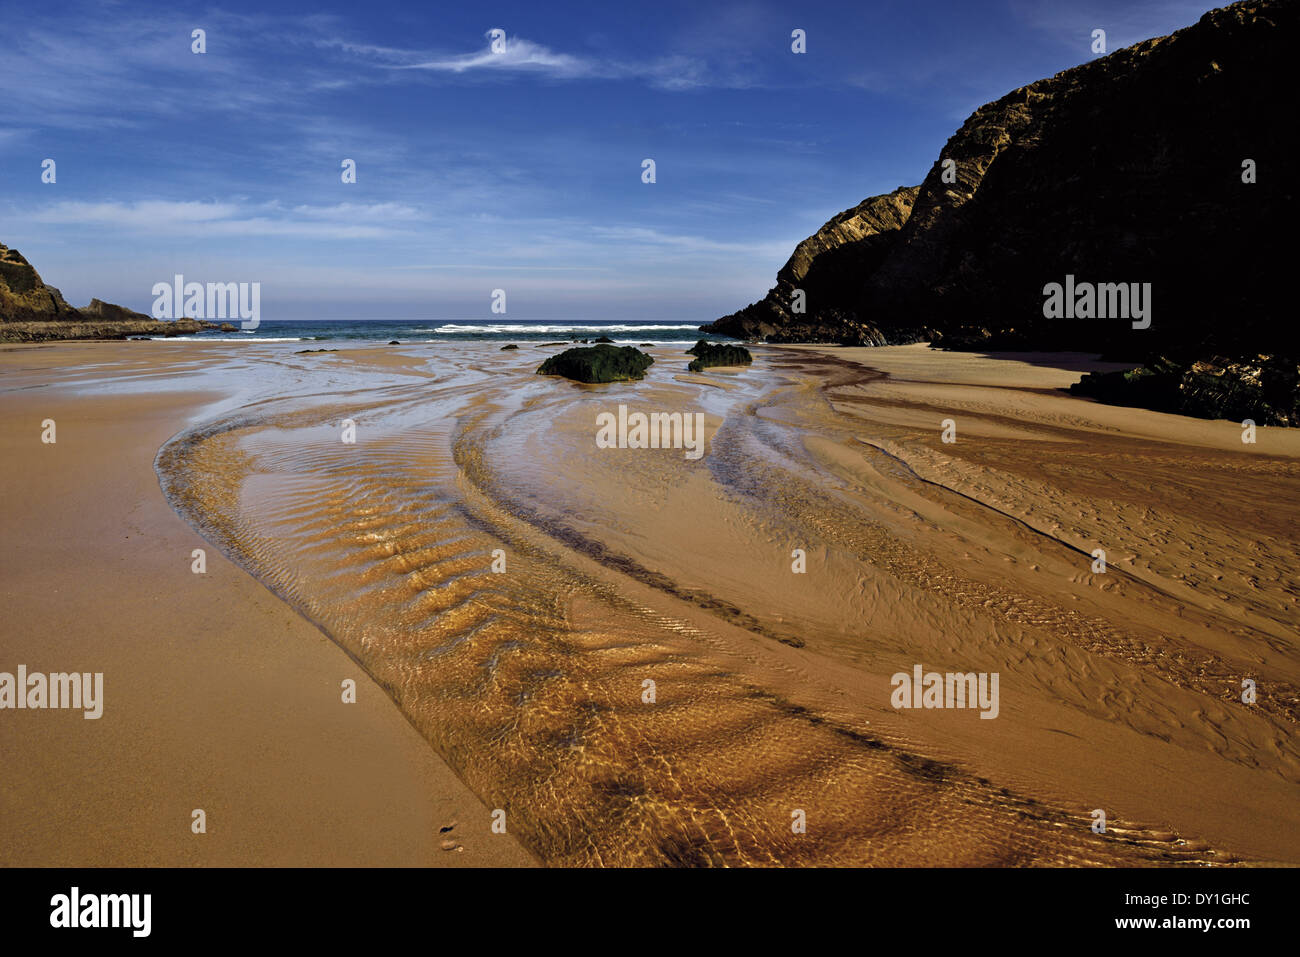 Portugal, Alentejo, Nature Park Costa Vicentina and Soouthwest Alentejo, beach, Praia do Carvalhal, low tide, wet sand, water running to the ocean, cliffs, travel, tourism, nature, calm, relaxing, peaceful, coast, coastal, seascape, seaside, ocean, Atlanti Stock Photo